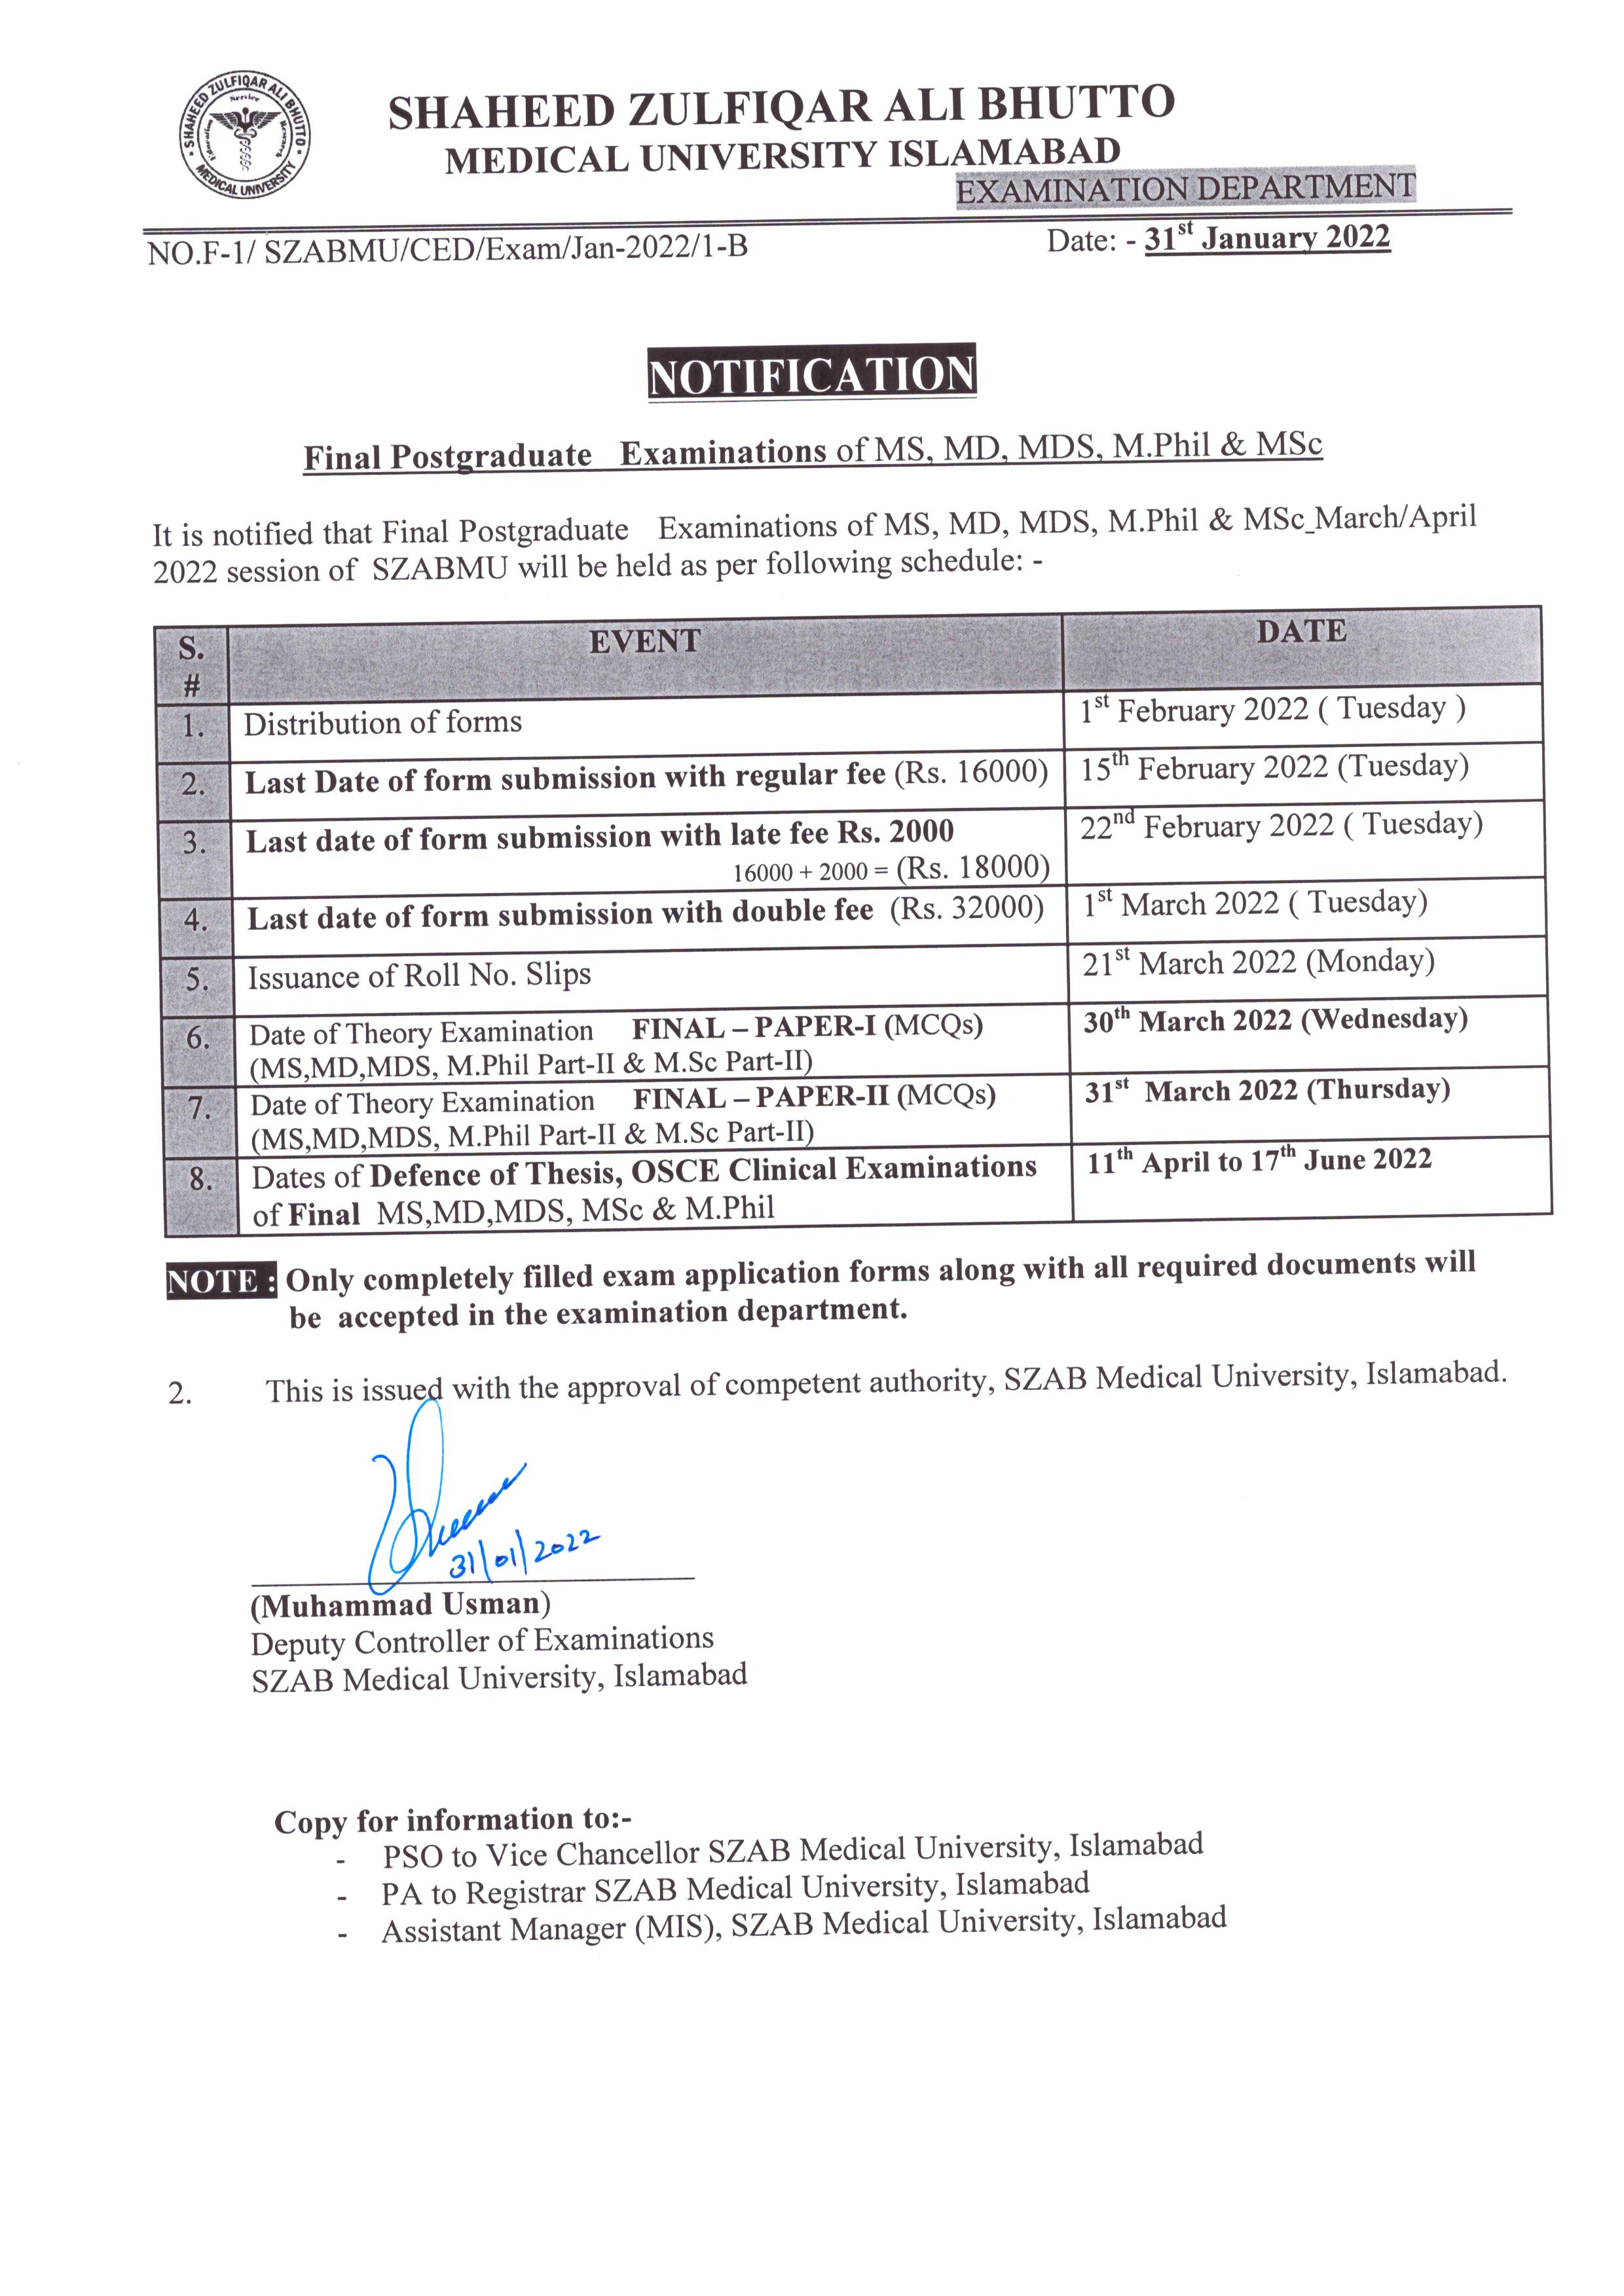 Exam Notifications - Final MS,MD,MDS,M.phil & MSc Examination March/April 2022 Session